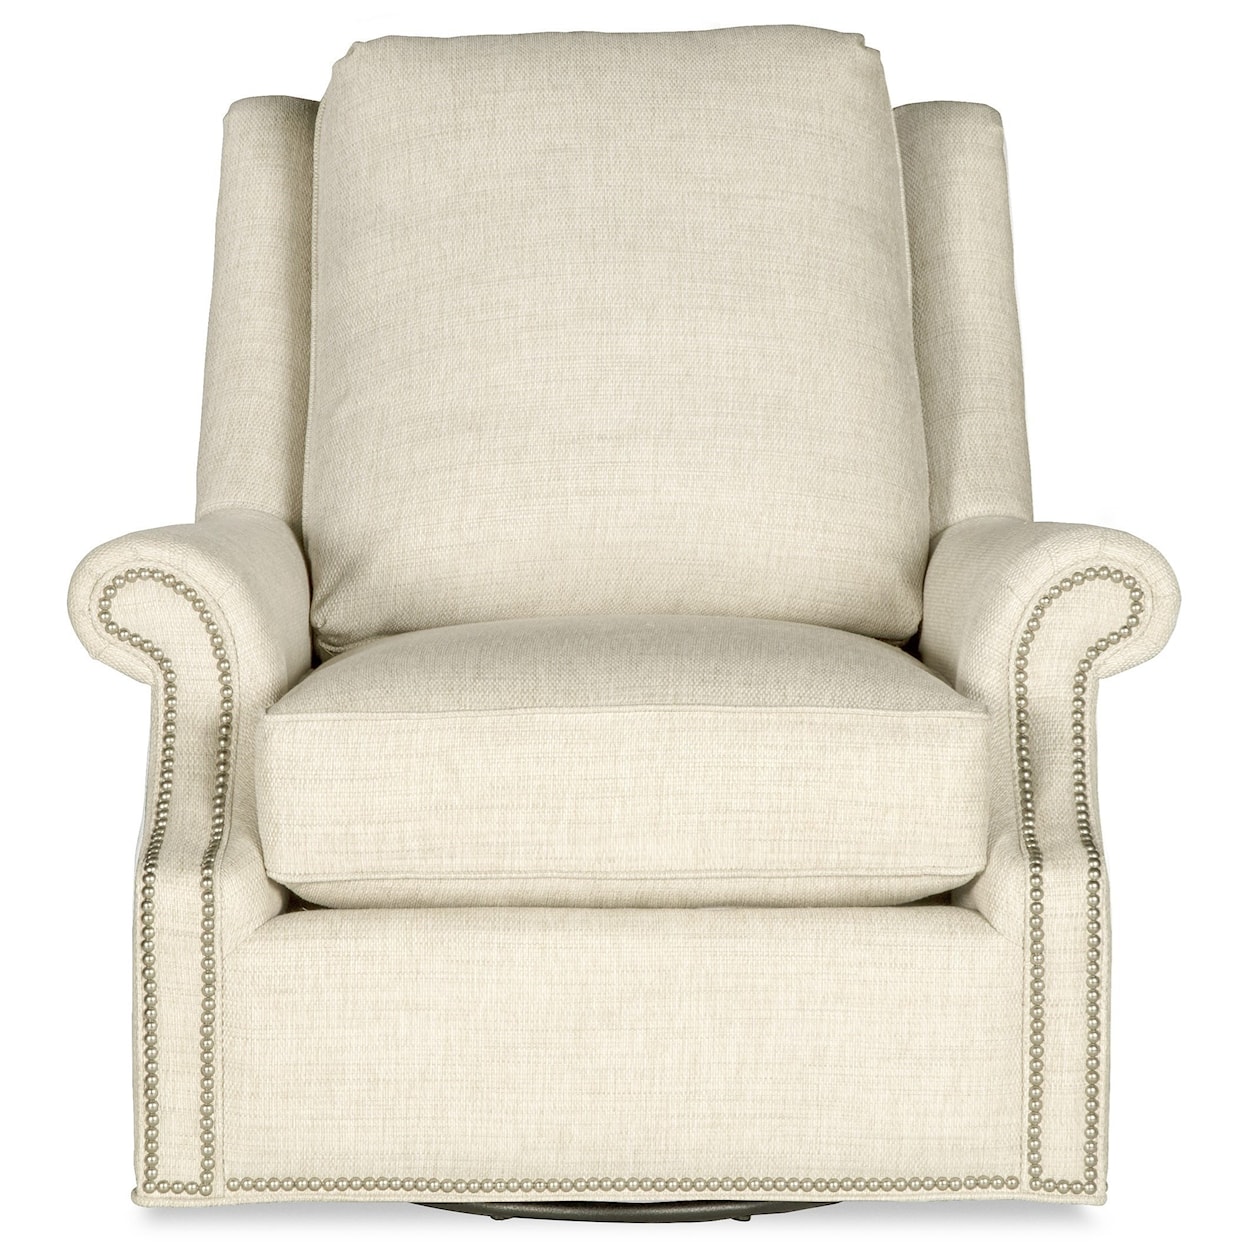 Hickory Craft 004510SG Swivel Chair